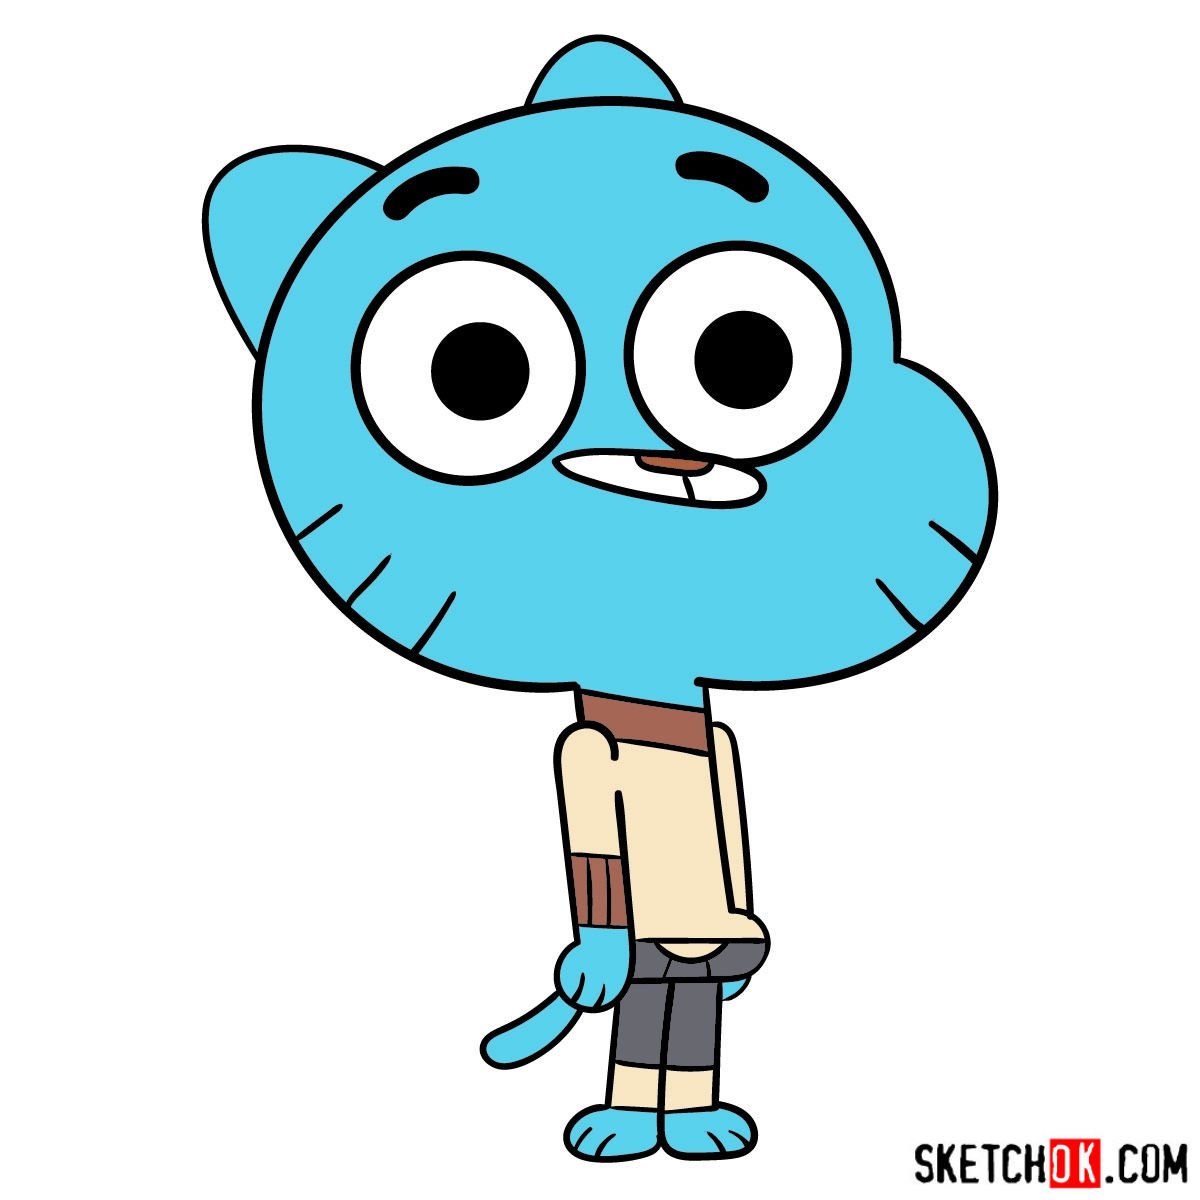 How to draw Gumball Watterson - Sketchok easy drawing guides